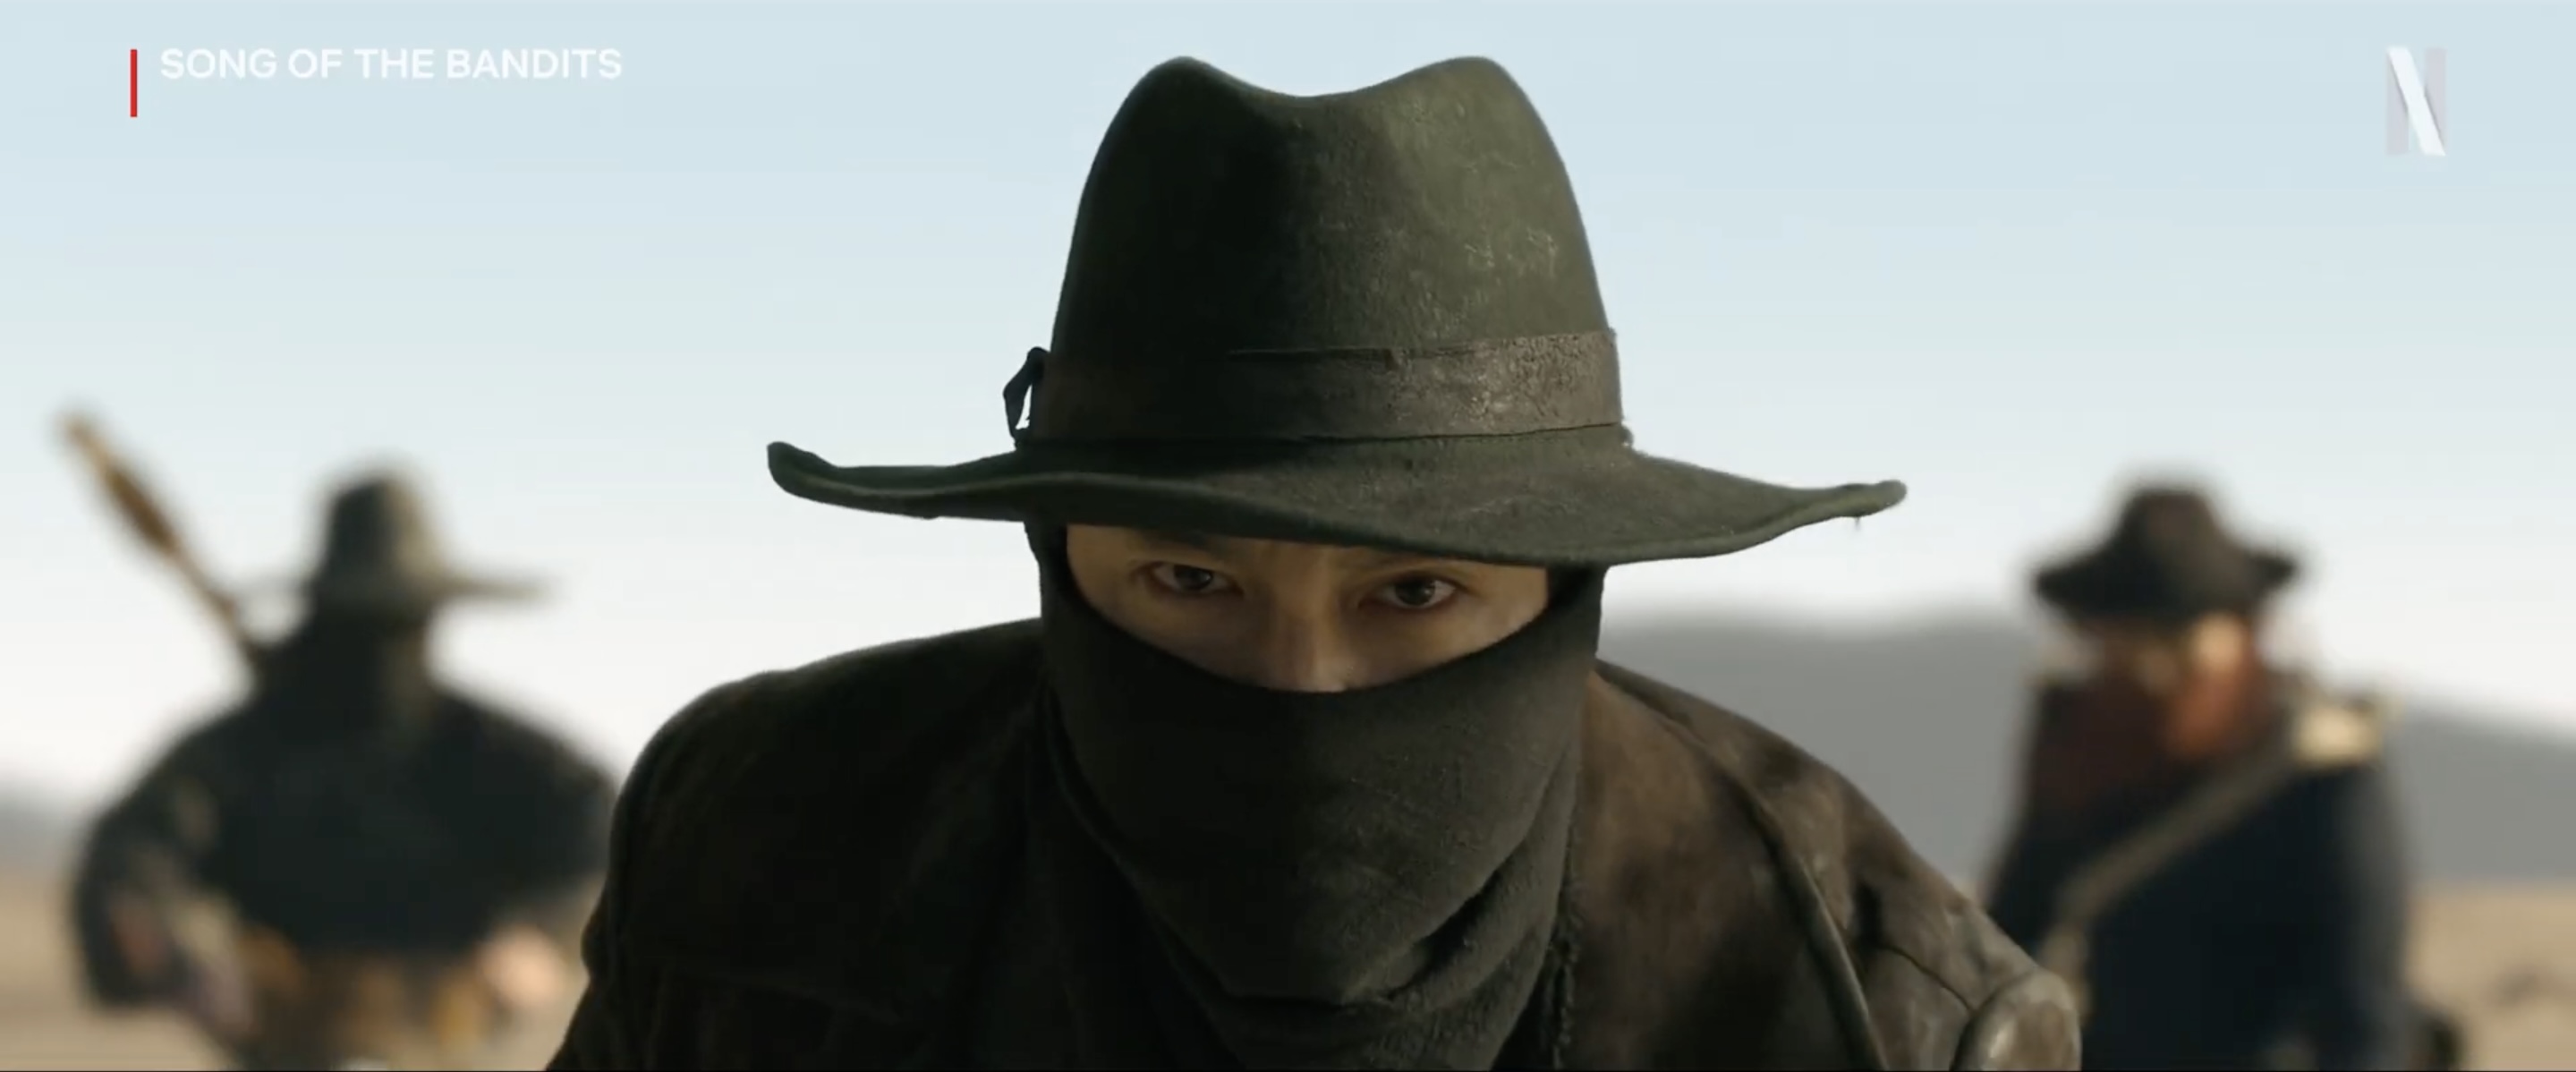 Kim Nam-gil fights for freedom in Song of the Bandits